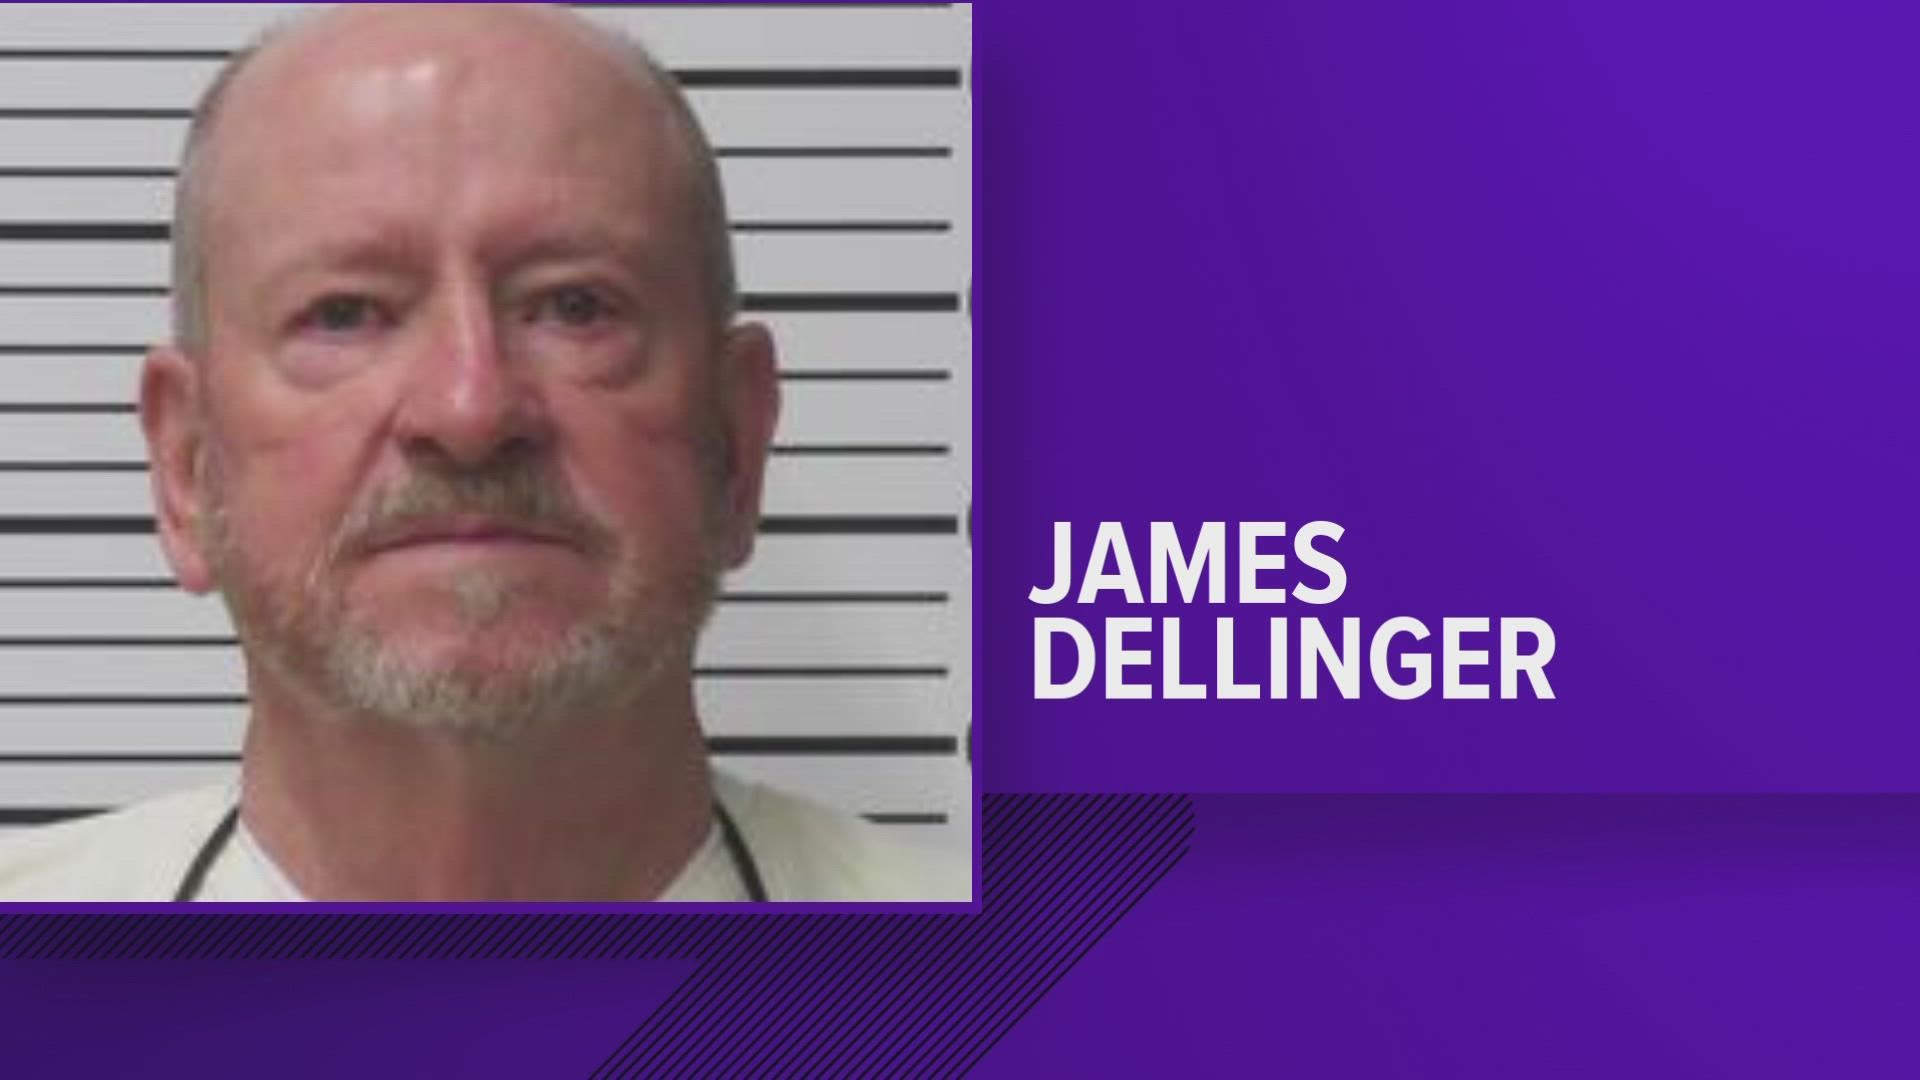 James Dellinger was sentenced to death in 1996 for first-degree murder in Blount County, according to TDOC.